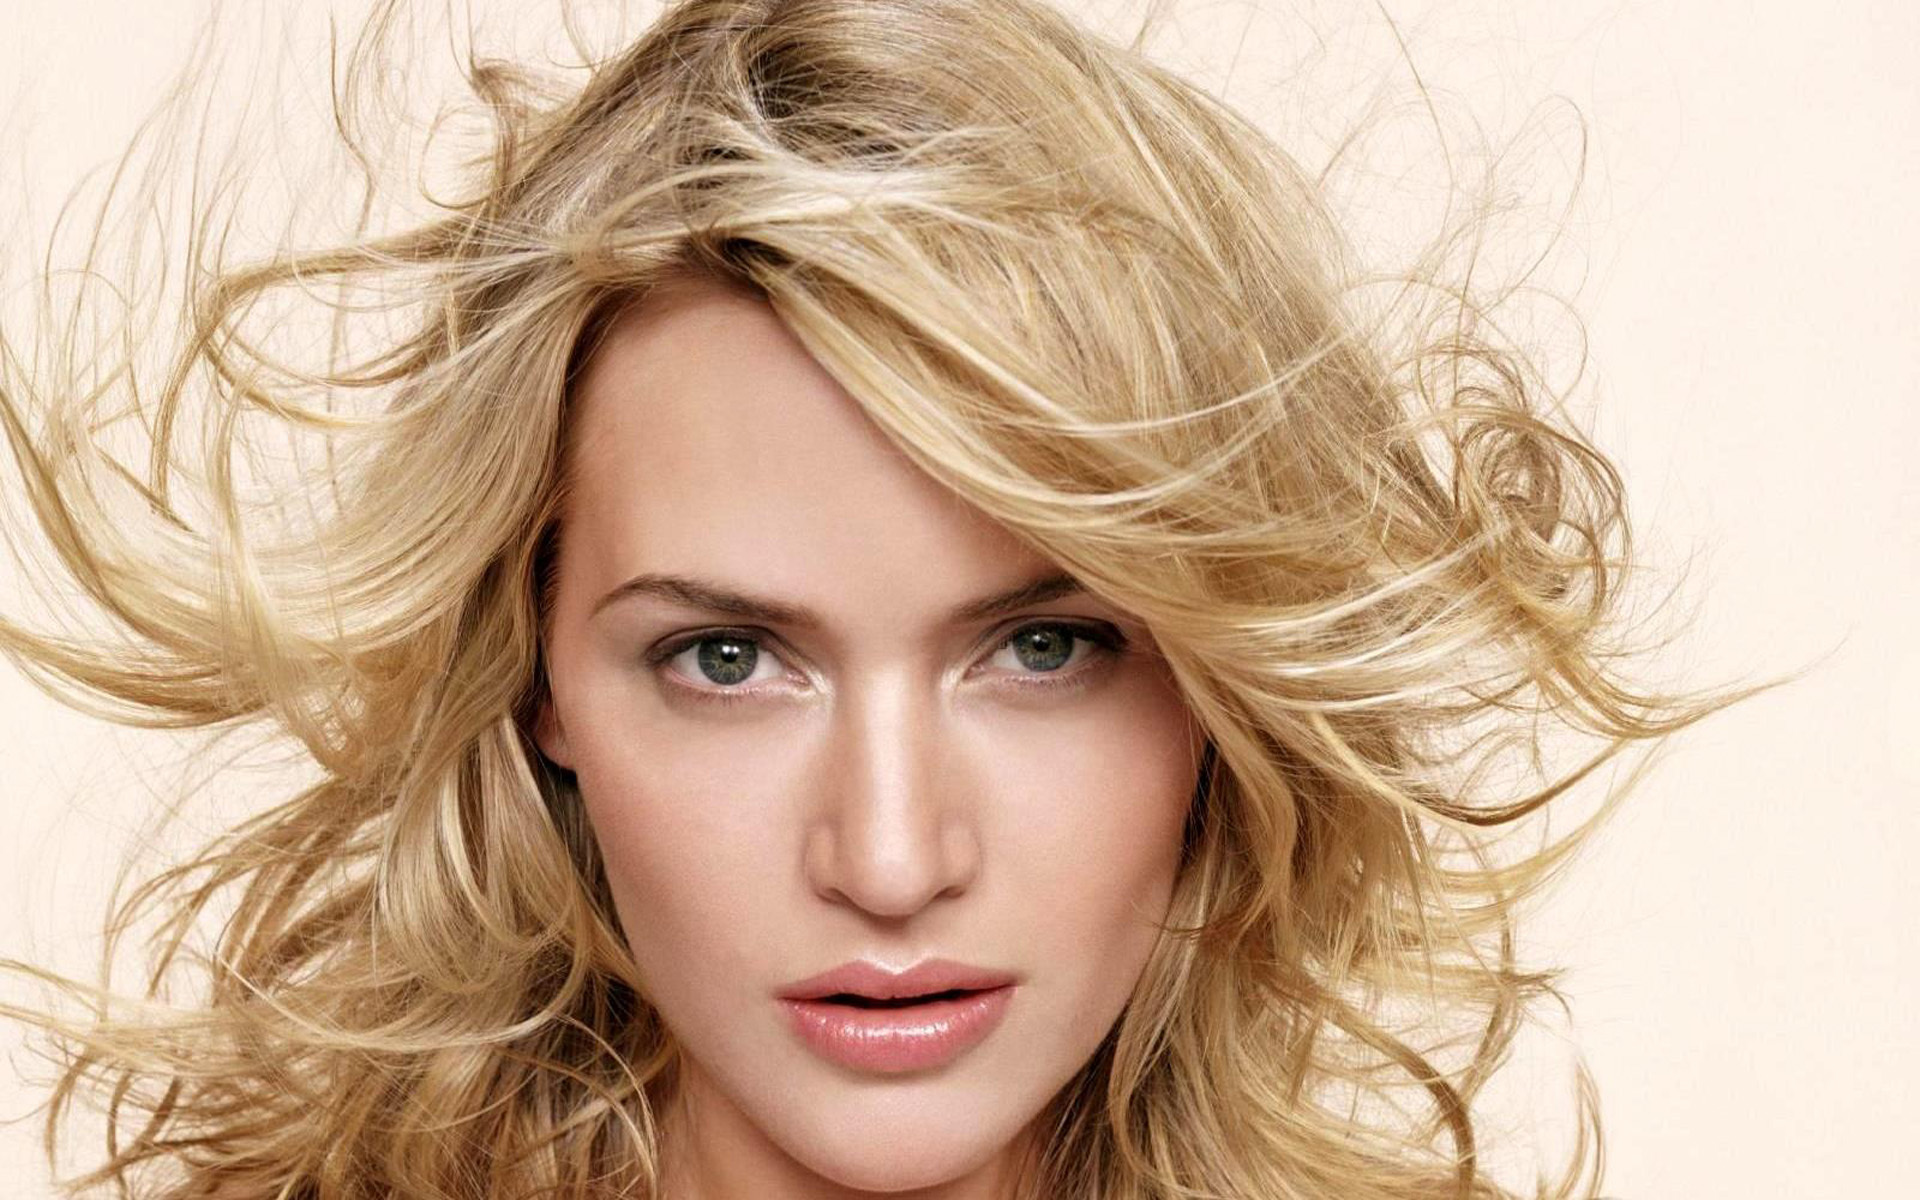 Kate Winslet hd pics Wallpapers